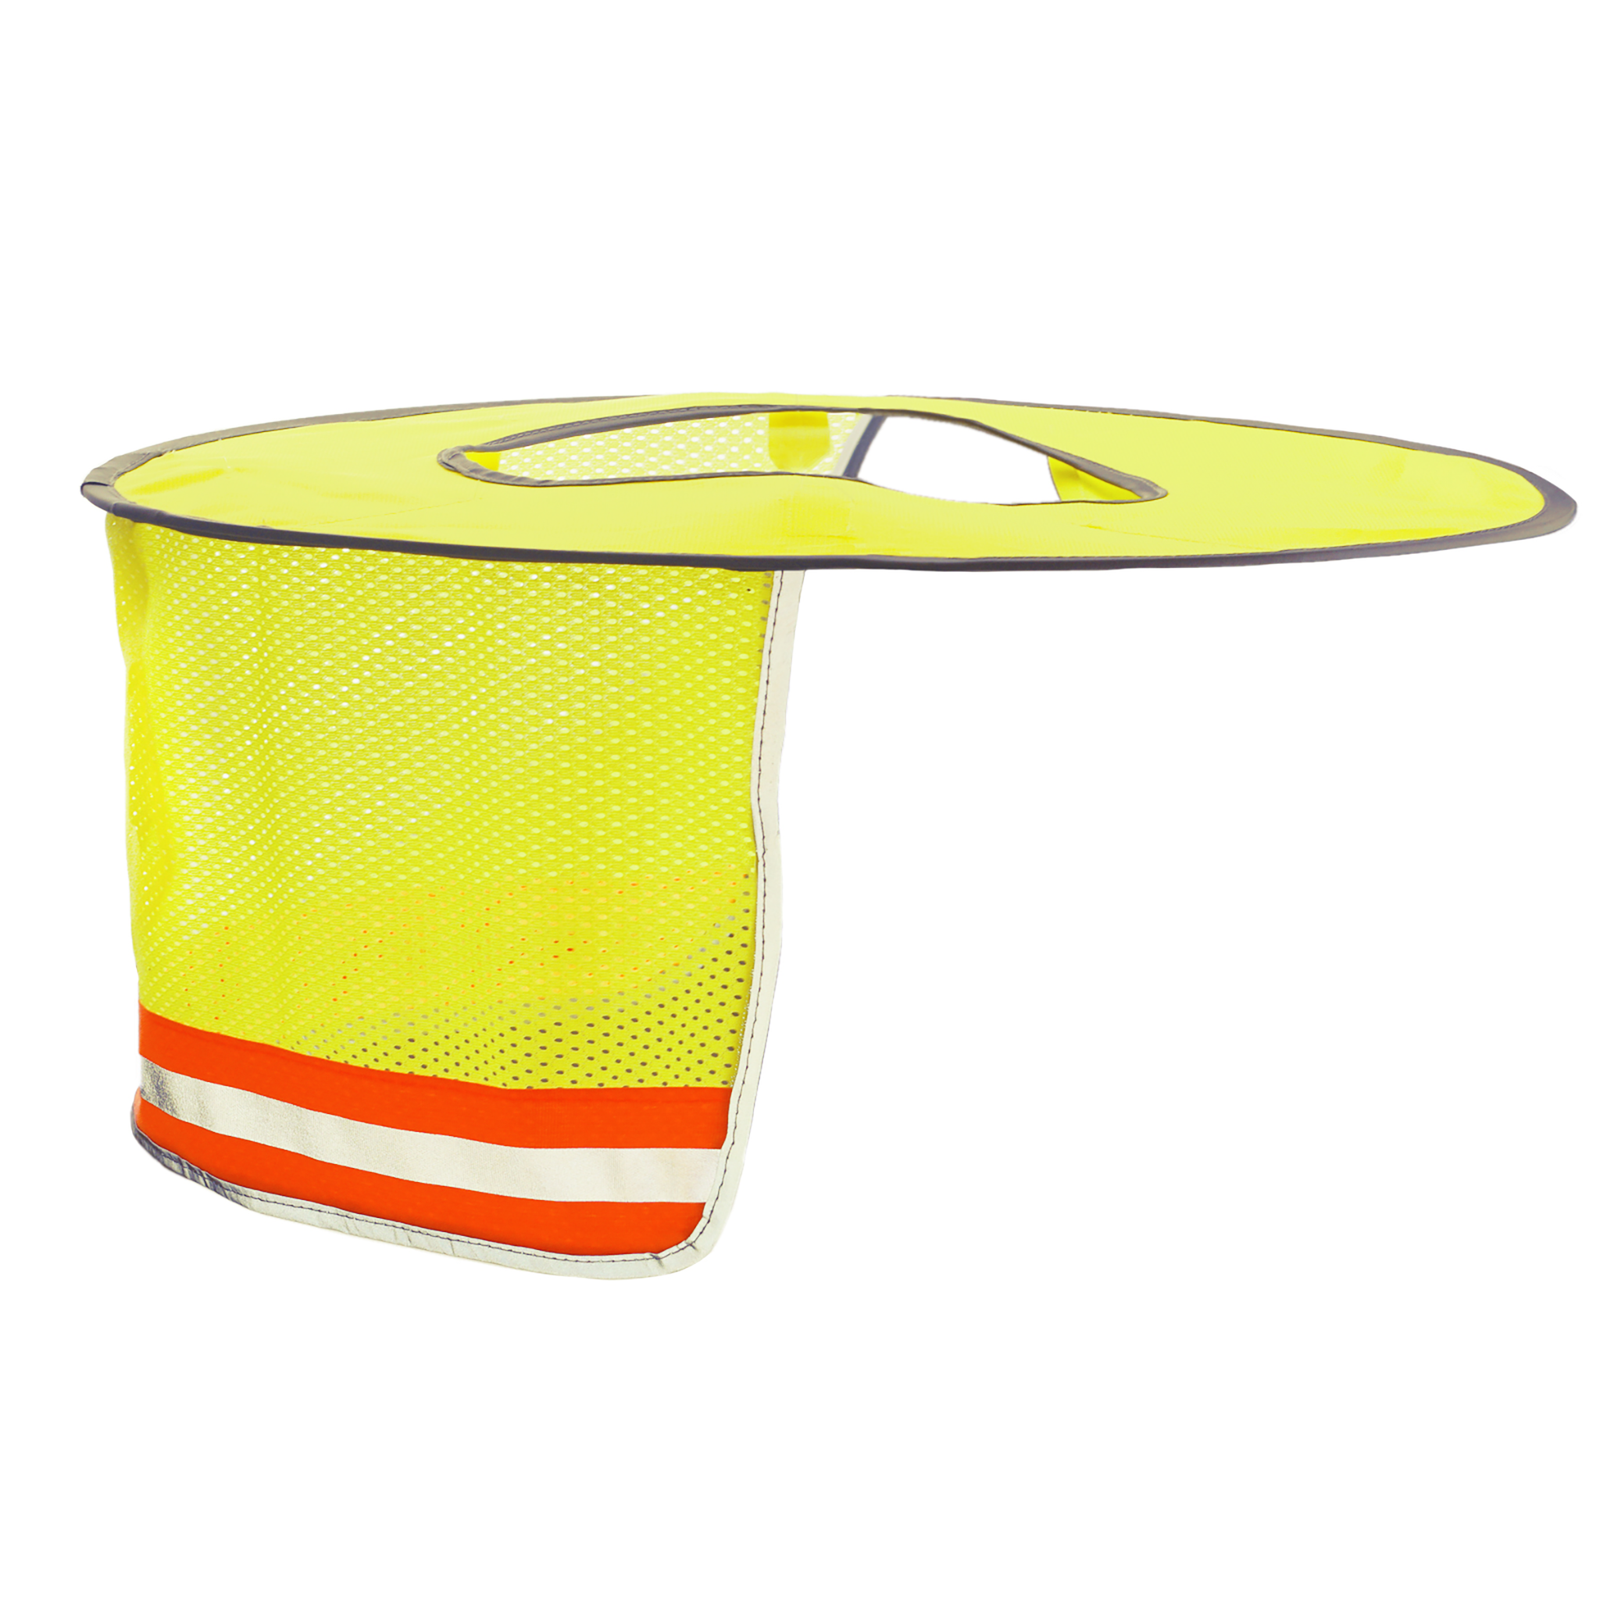 High Vis 2-Tone Neck Shade for Hard Hats with Reflective Stripe